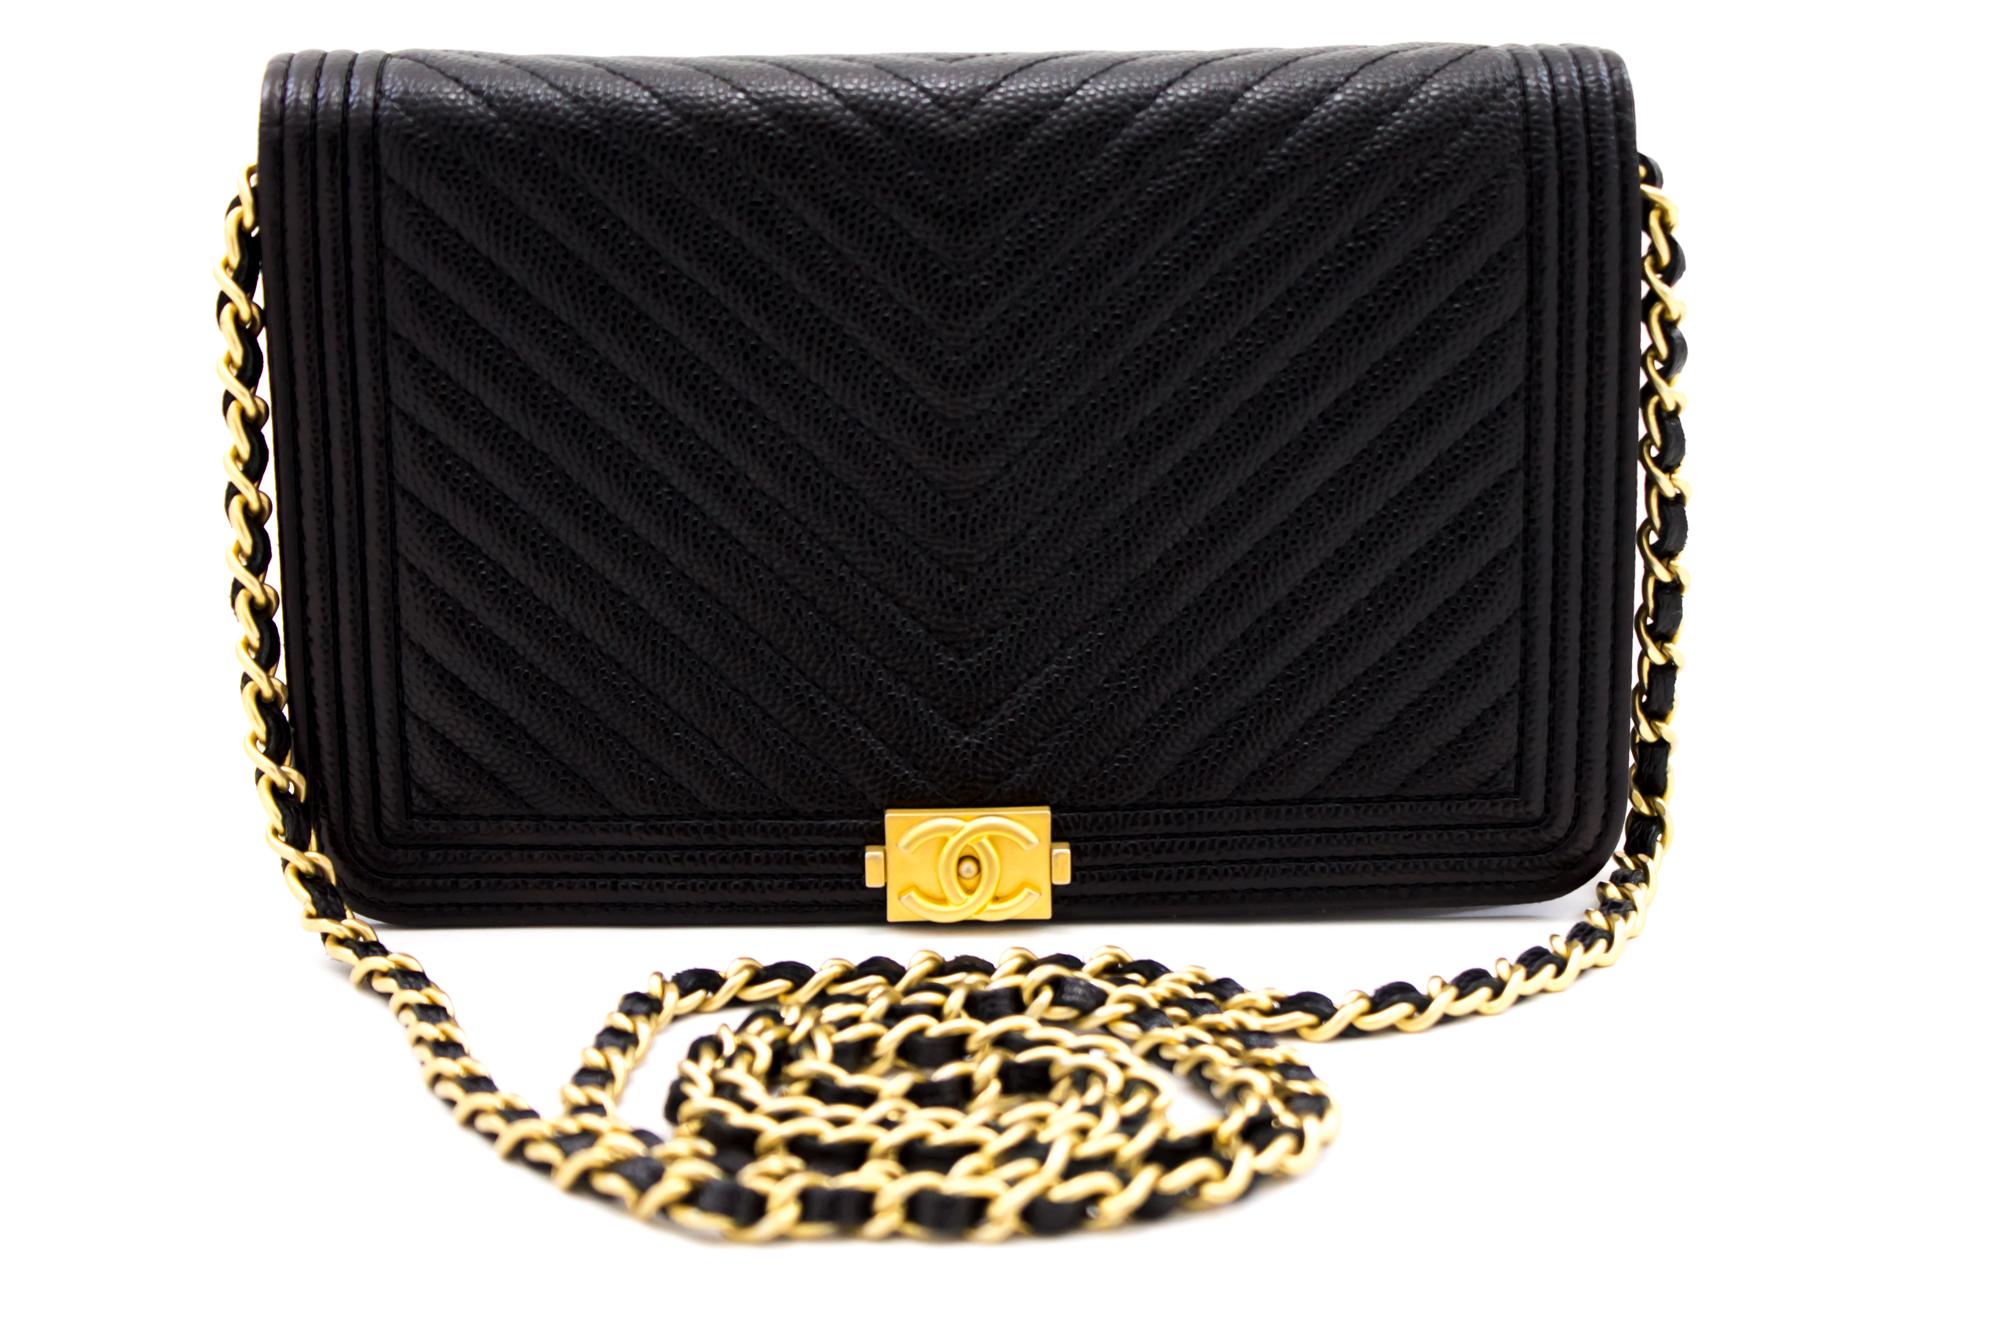 An authentic CHANEL Boy V-Stitch Caviar Wallet On Chain WOC Black Shoulder Bag. The color is Black. The outside material is Leather. The pattern is Solid. This item is Contemporary. The year of manufacture would be 2018.
Conditions & Ratings
Outside